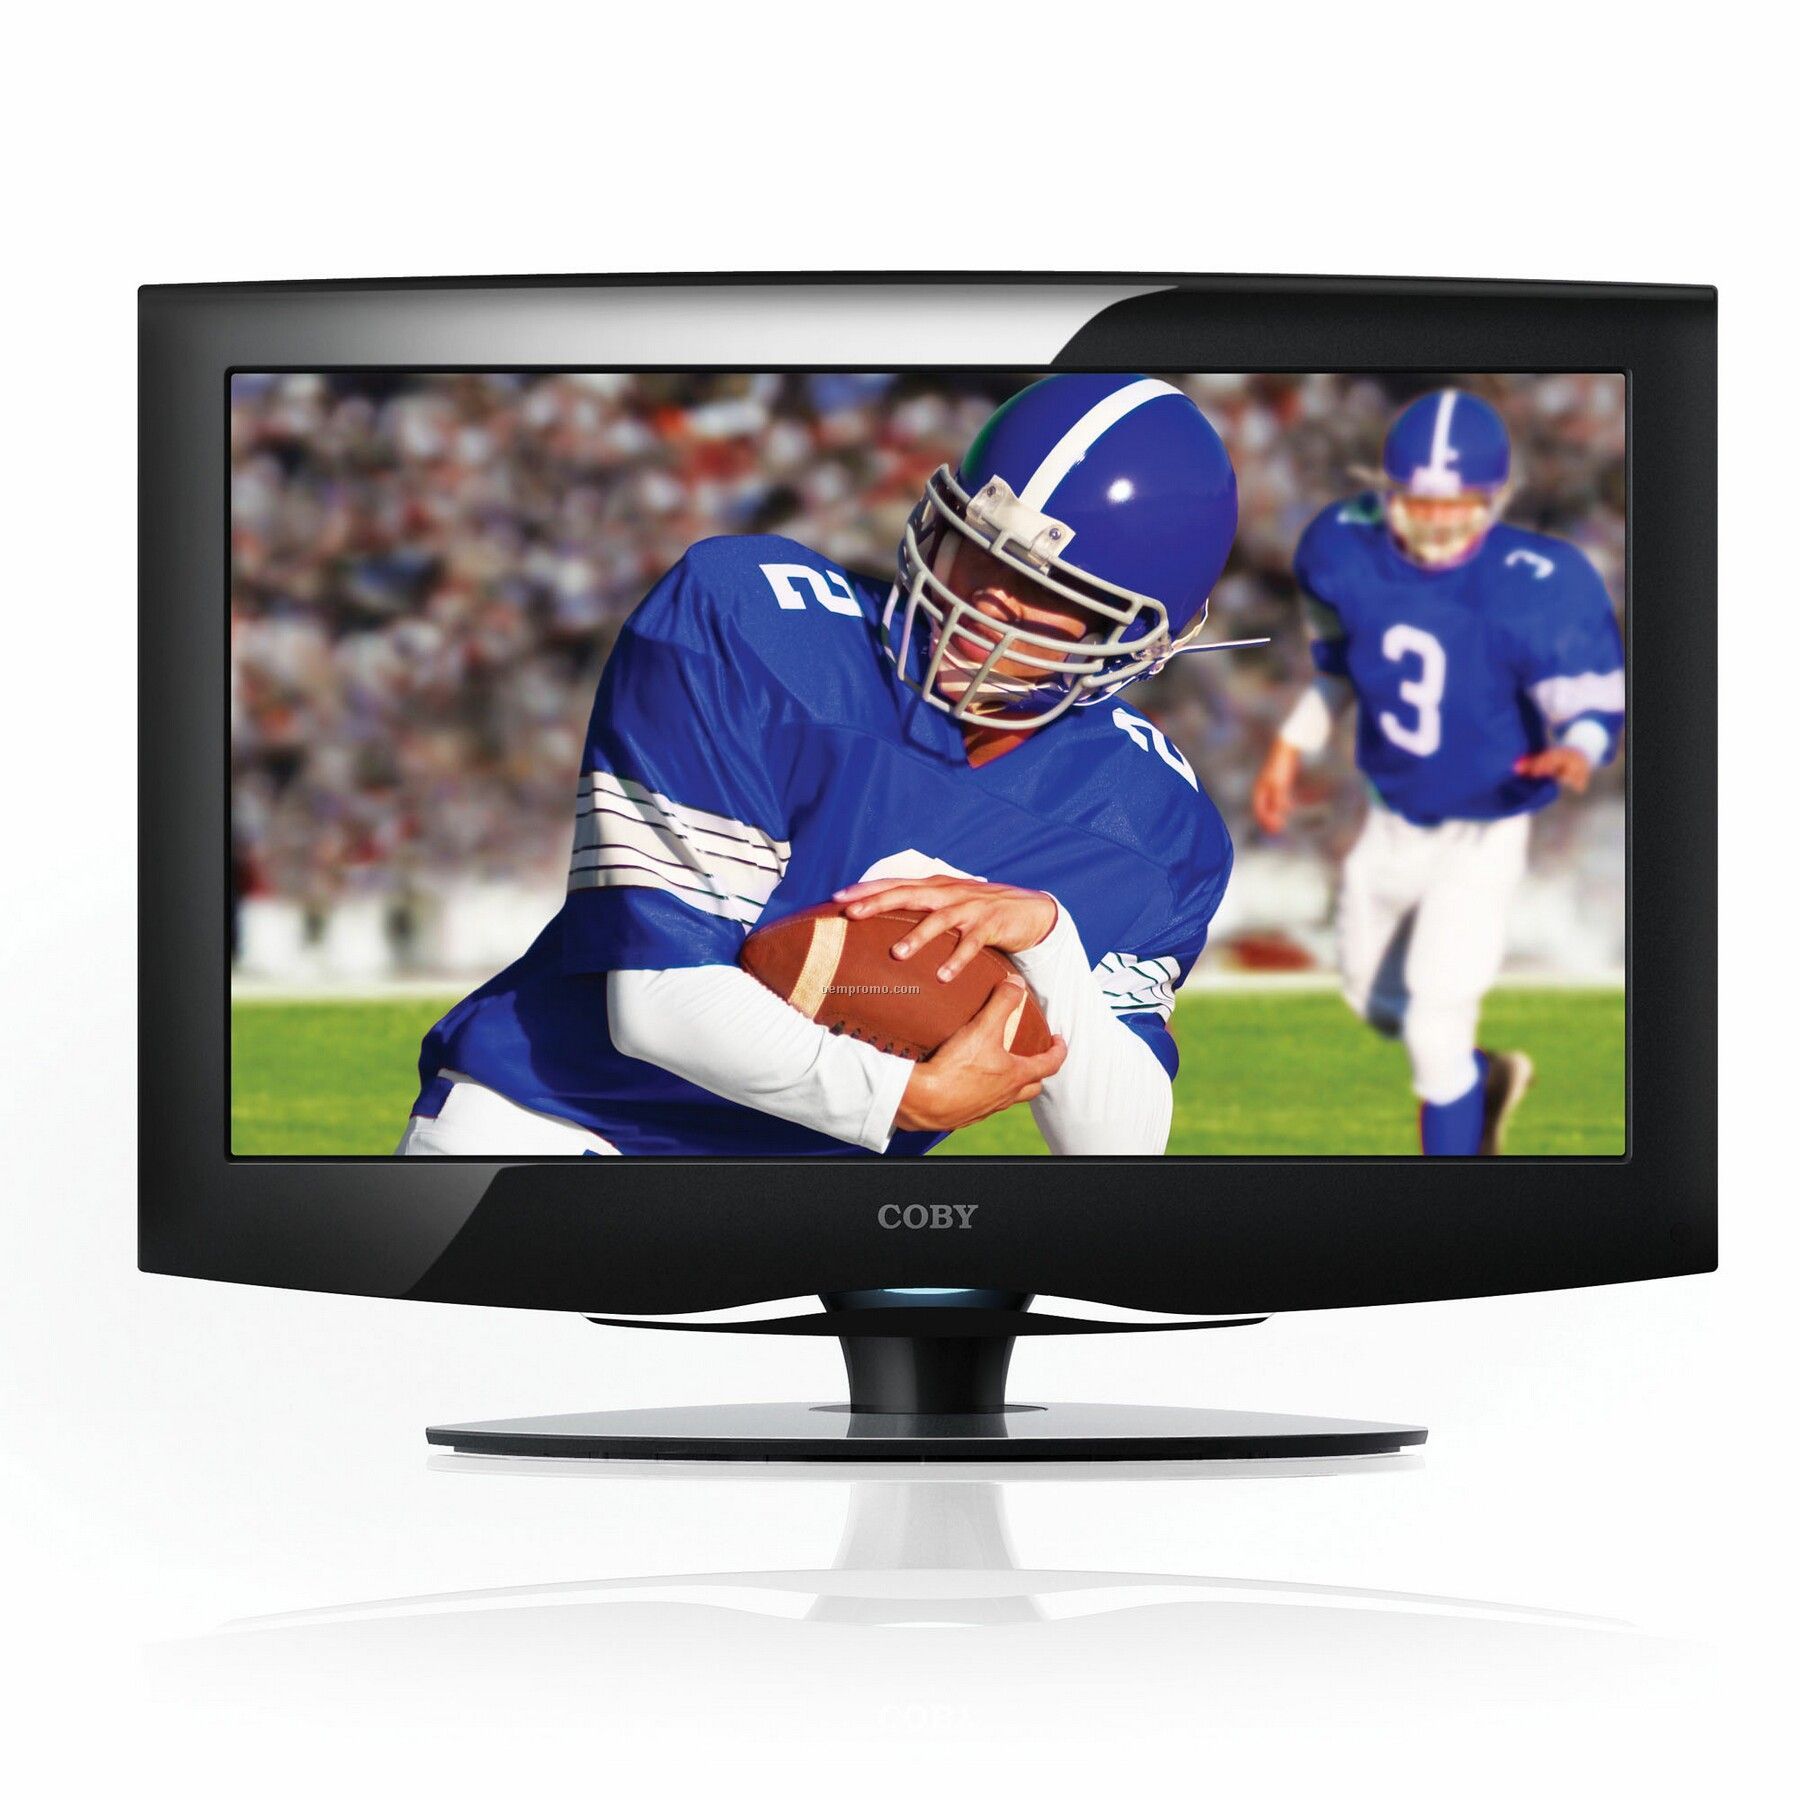 Coby 19" Widescreen Lcd Hdtv